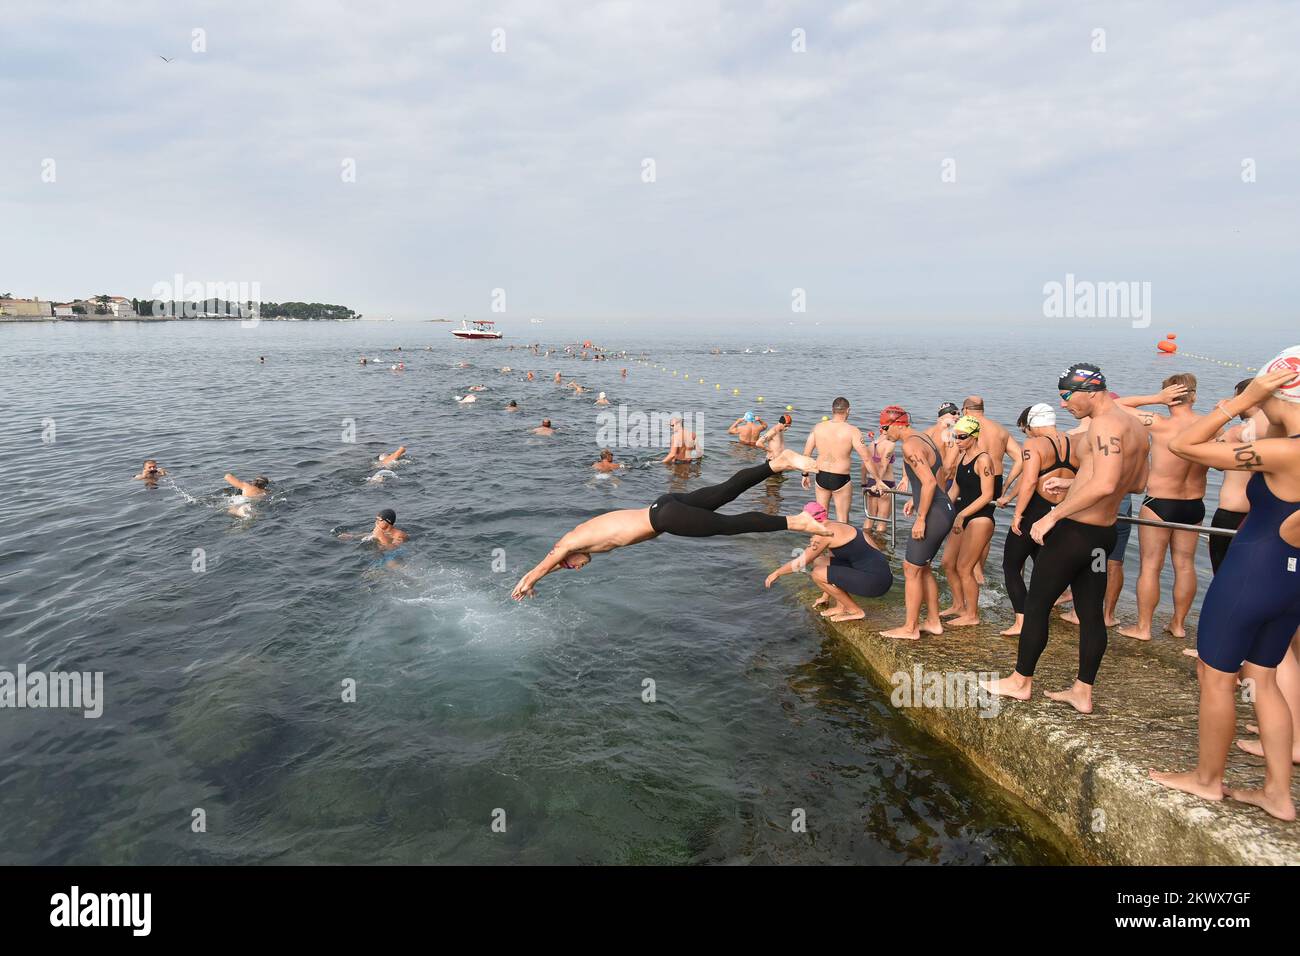 03.09.2016., Porec, Croatia - Held is 17th Porec dolphin swimming challenge for everyone, it does not matter who you get to the goal, you have your medal and a T-shirt ensure participation. This year brought together 1,000 participants from various European countries and Croatian but the most numerous were the same as in previous years Hungarians. Fastest swimmer is from Split Ivan Sipic.   Stock Photo